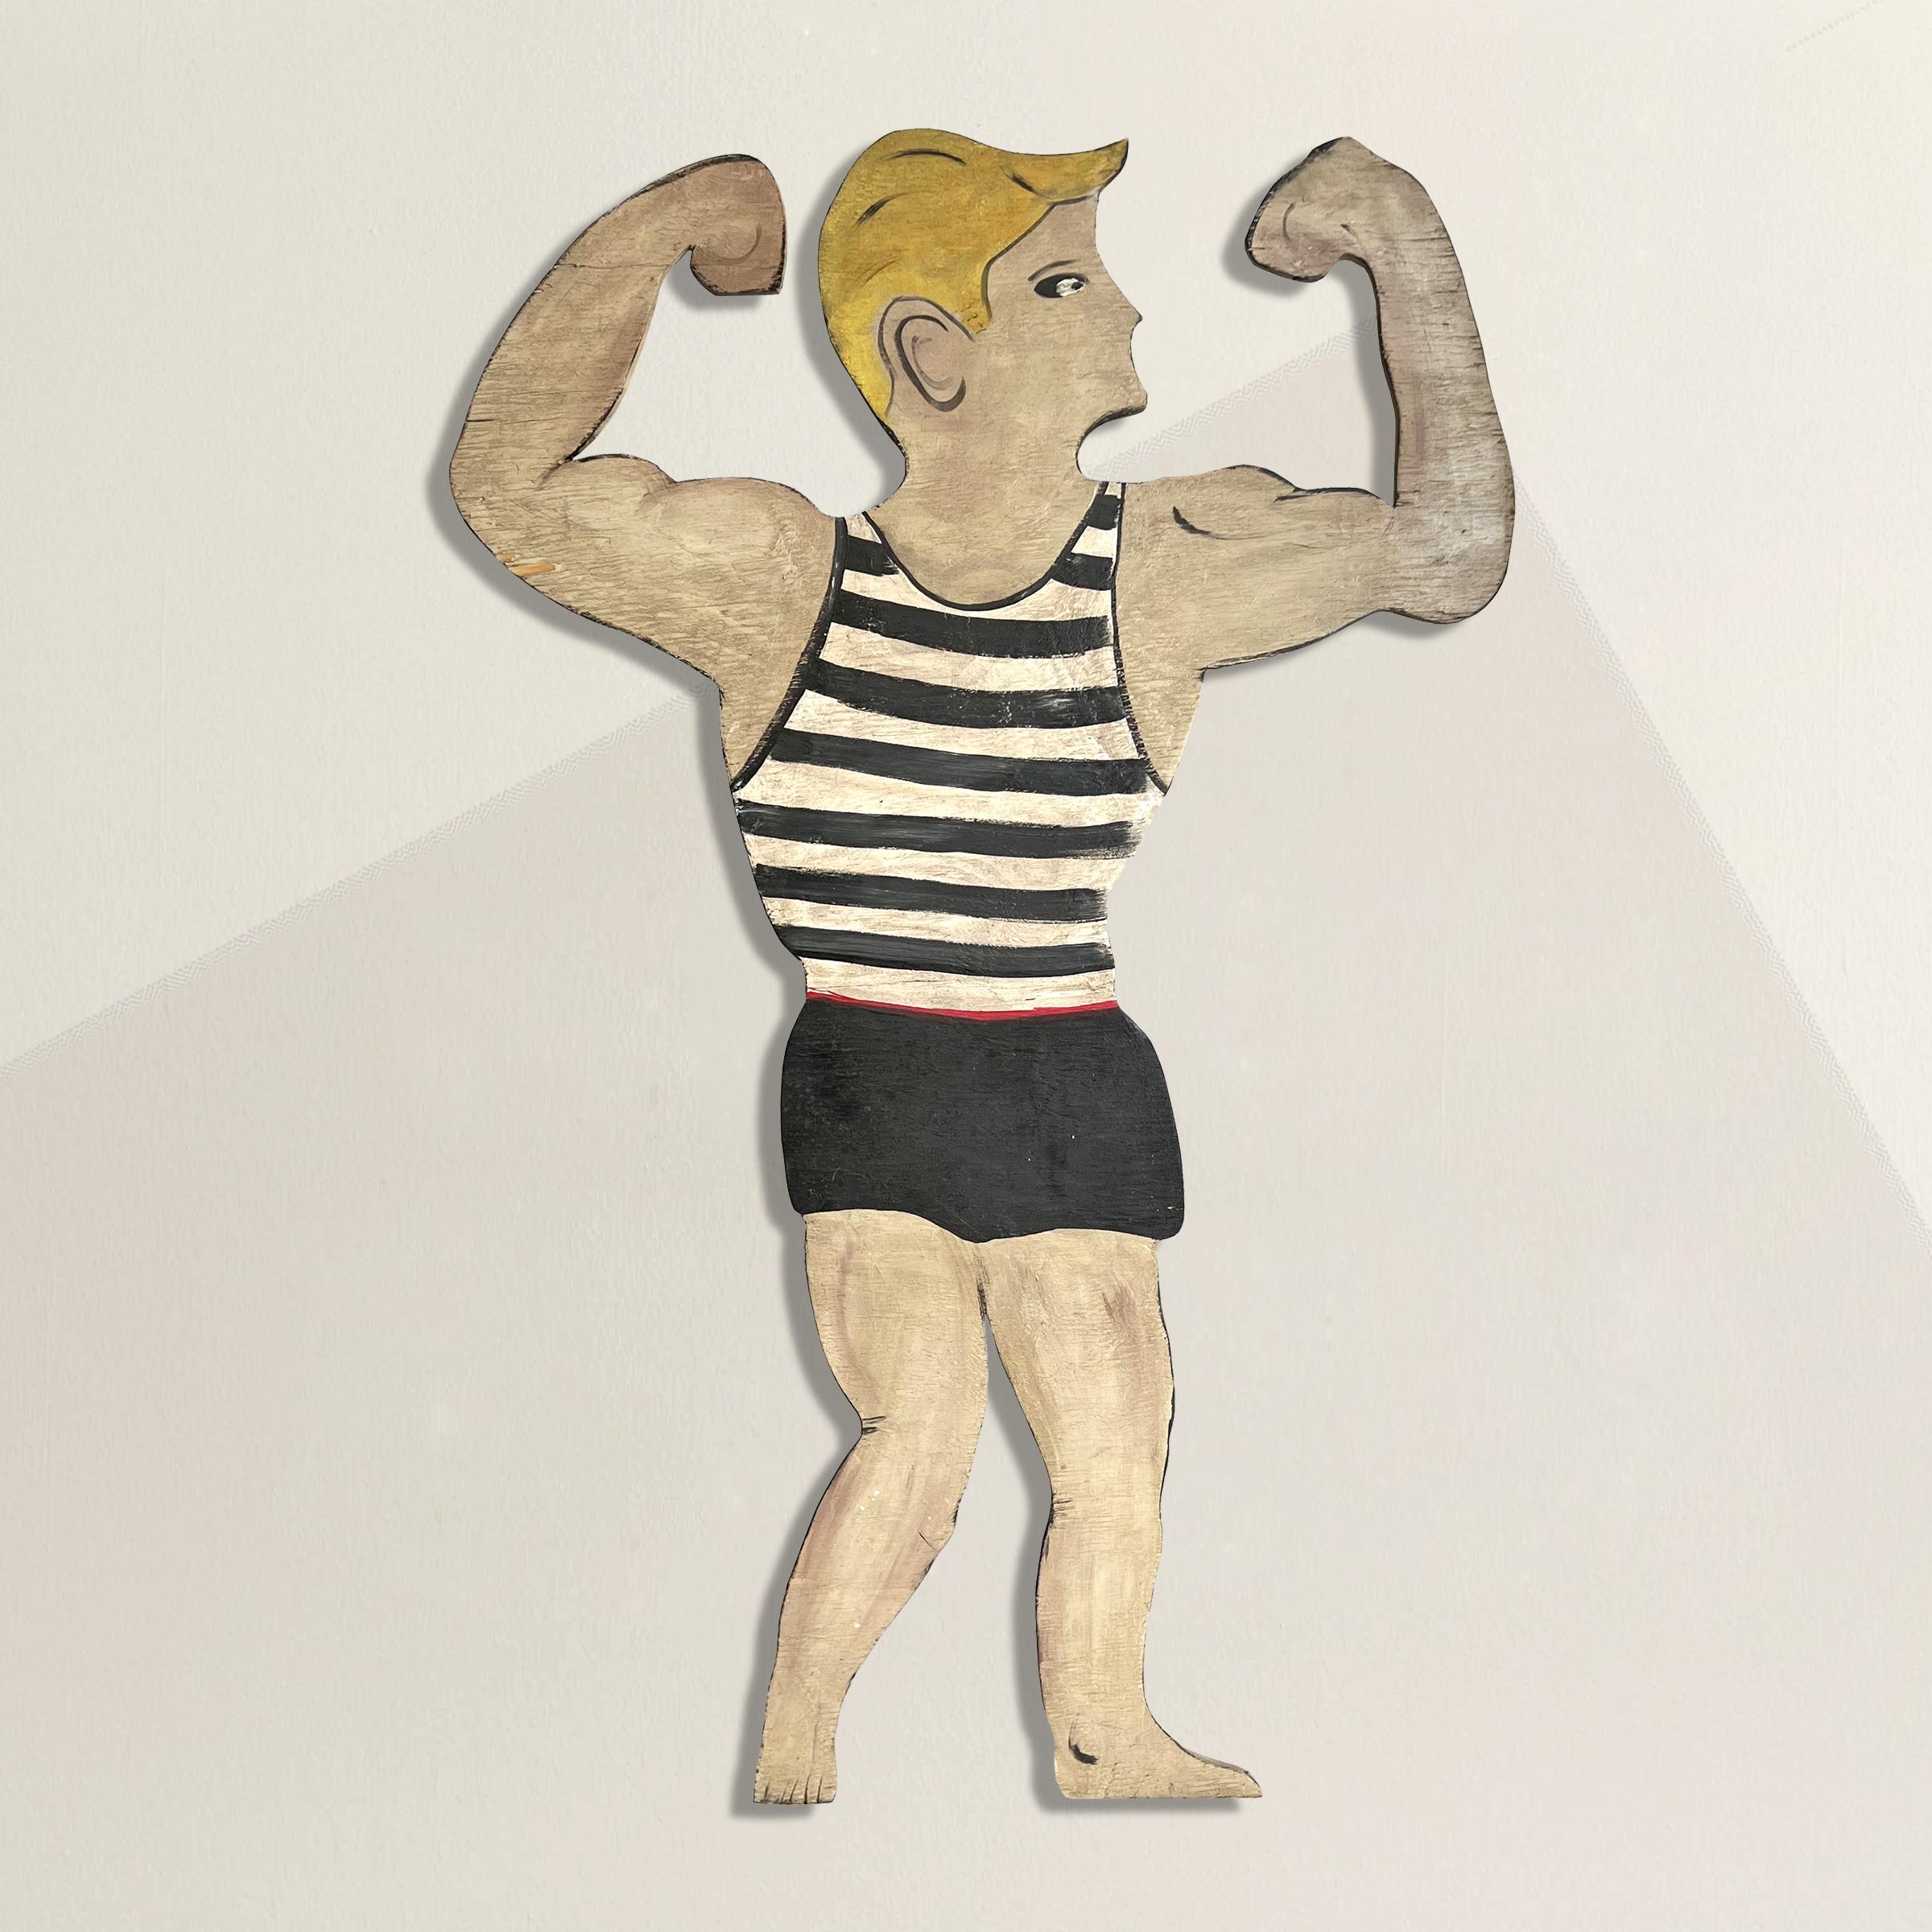 A playful and cheeky mid-20th century American Folk Art wooden cutout of a blond swimmer flexing in his black and white striped swimsuit, mounted on a custom steel wall mount so he can be hung anywhere you wish.